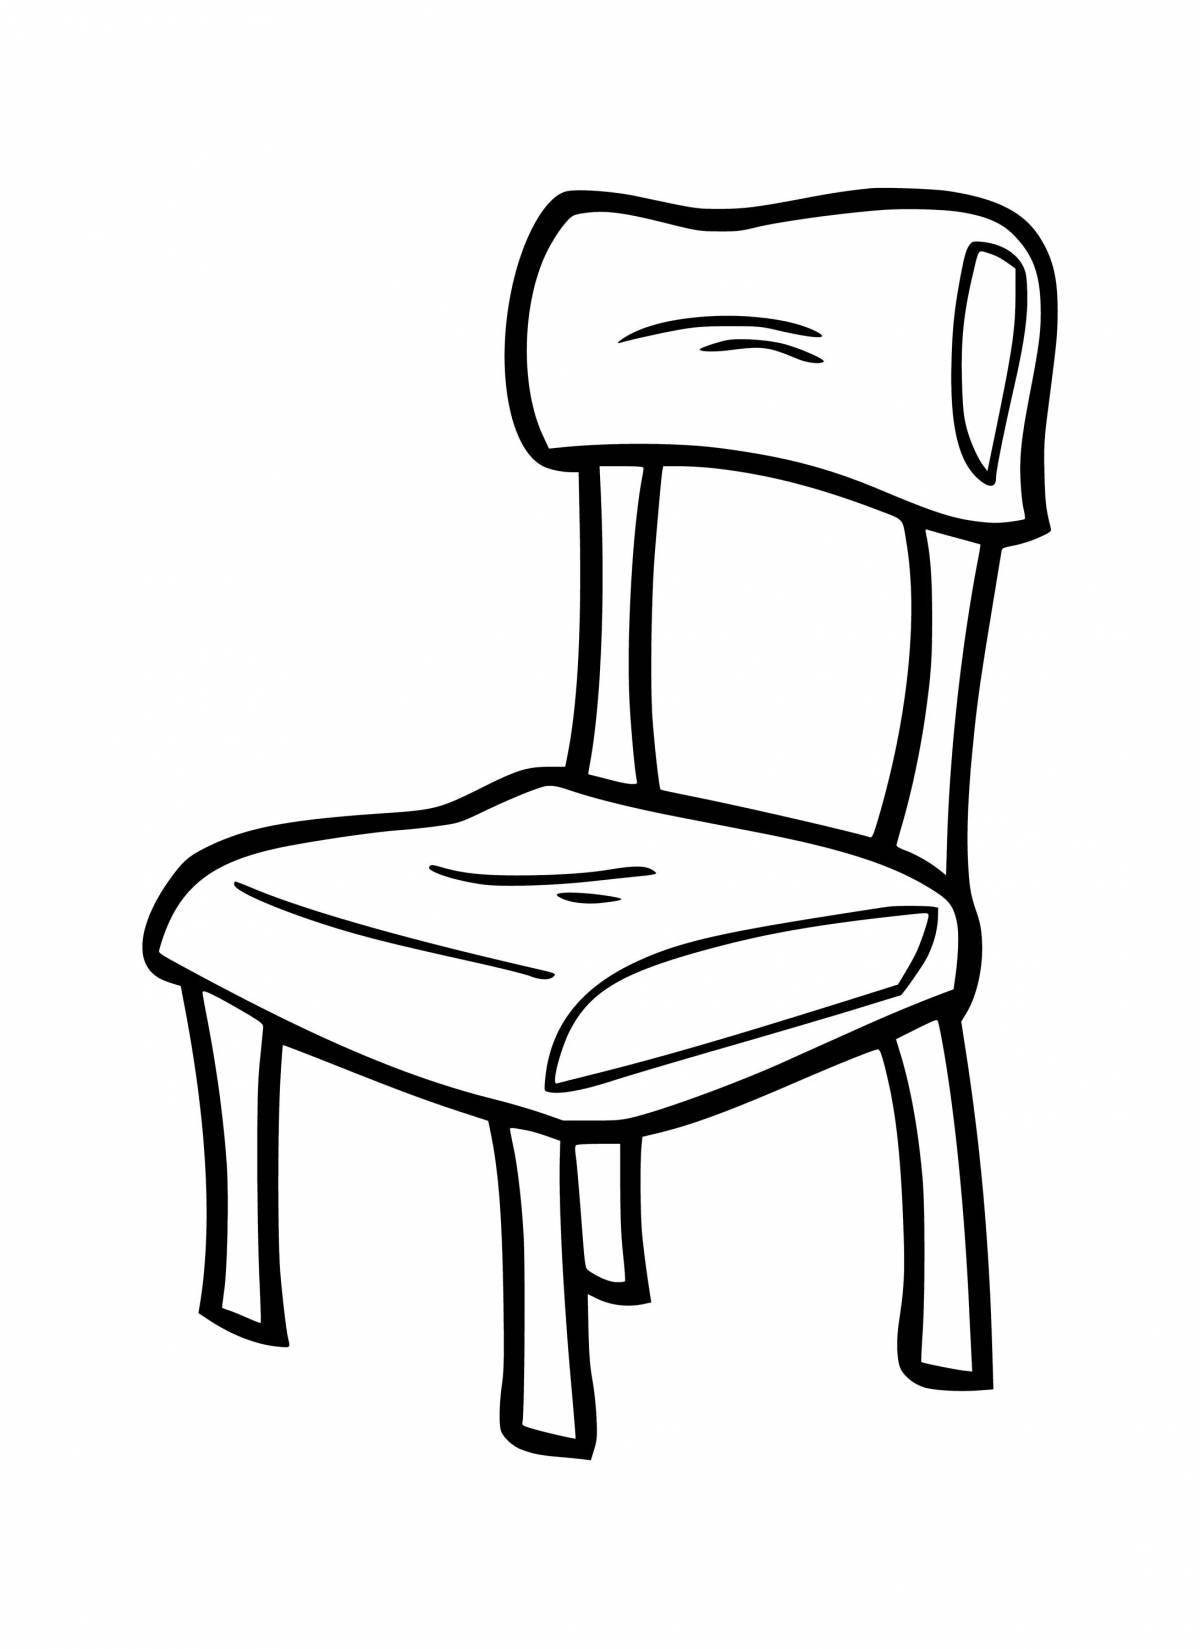 Exquisite chair coloring page